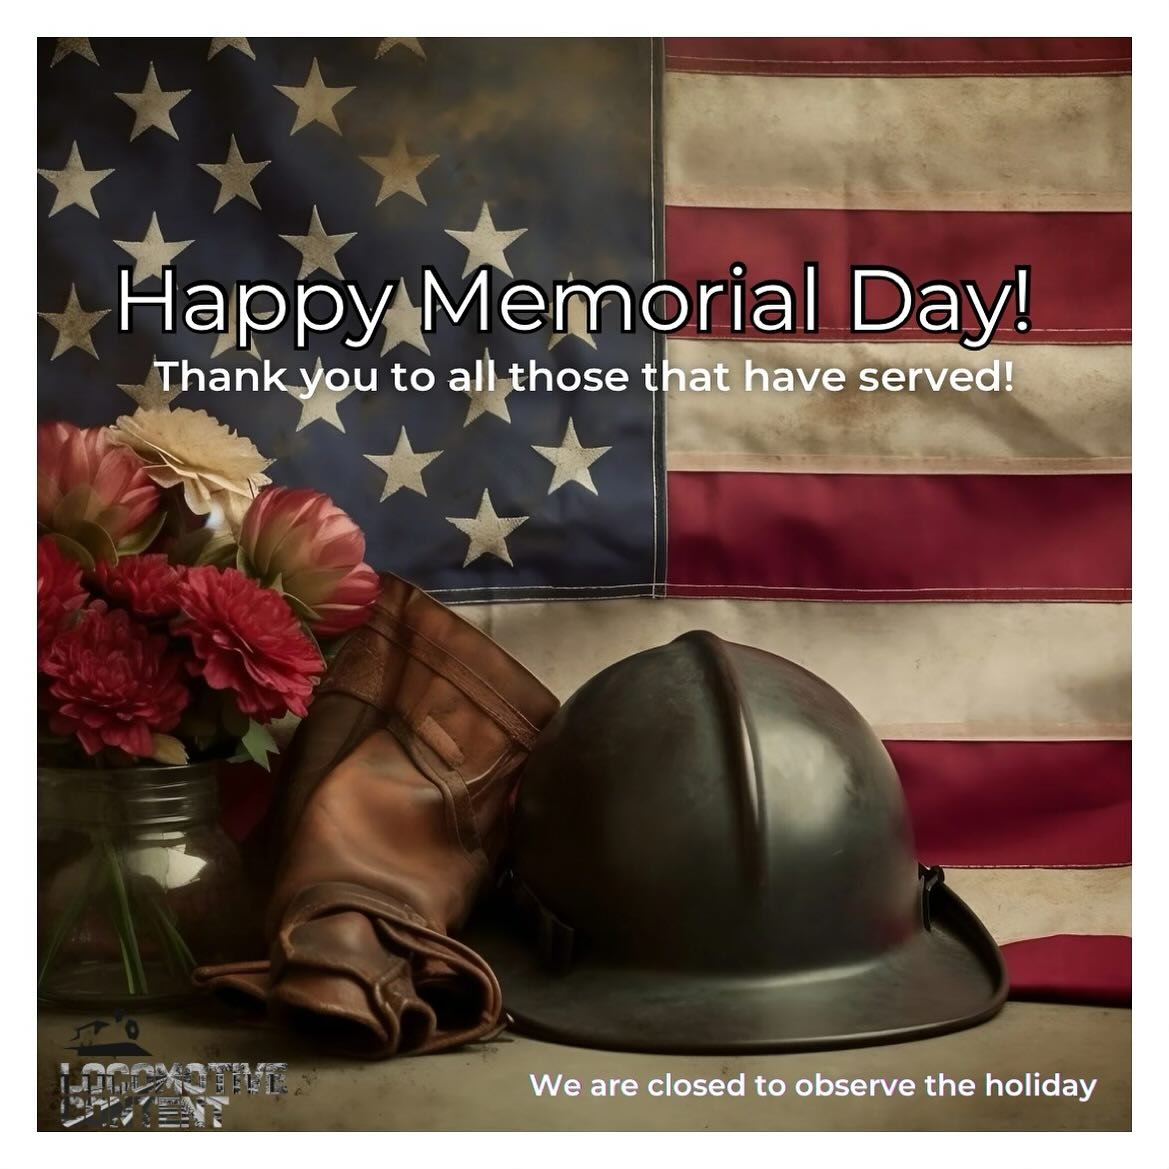 Honoring all those that have served our country today and everyday. We are closed to observe this holiday. Open tomorrow usual business hours. Enjoy your day everyone. 

#memorialdayweekend #happymemorialday #holiday #honoringthosewhoserved #locomoti